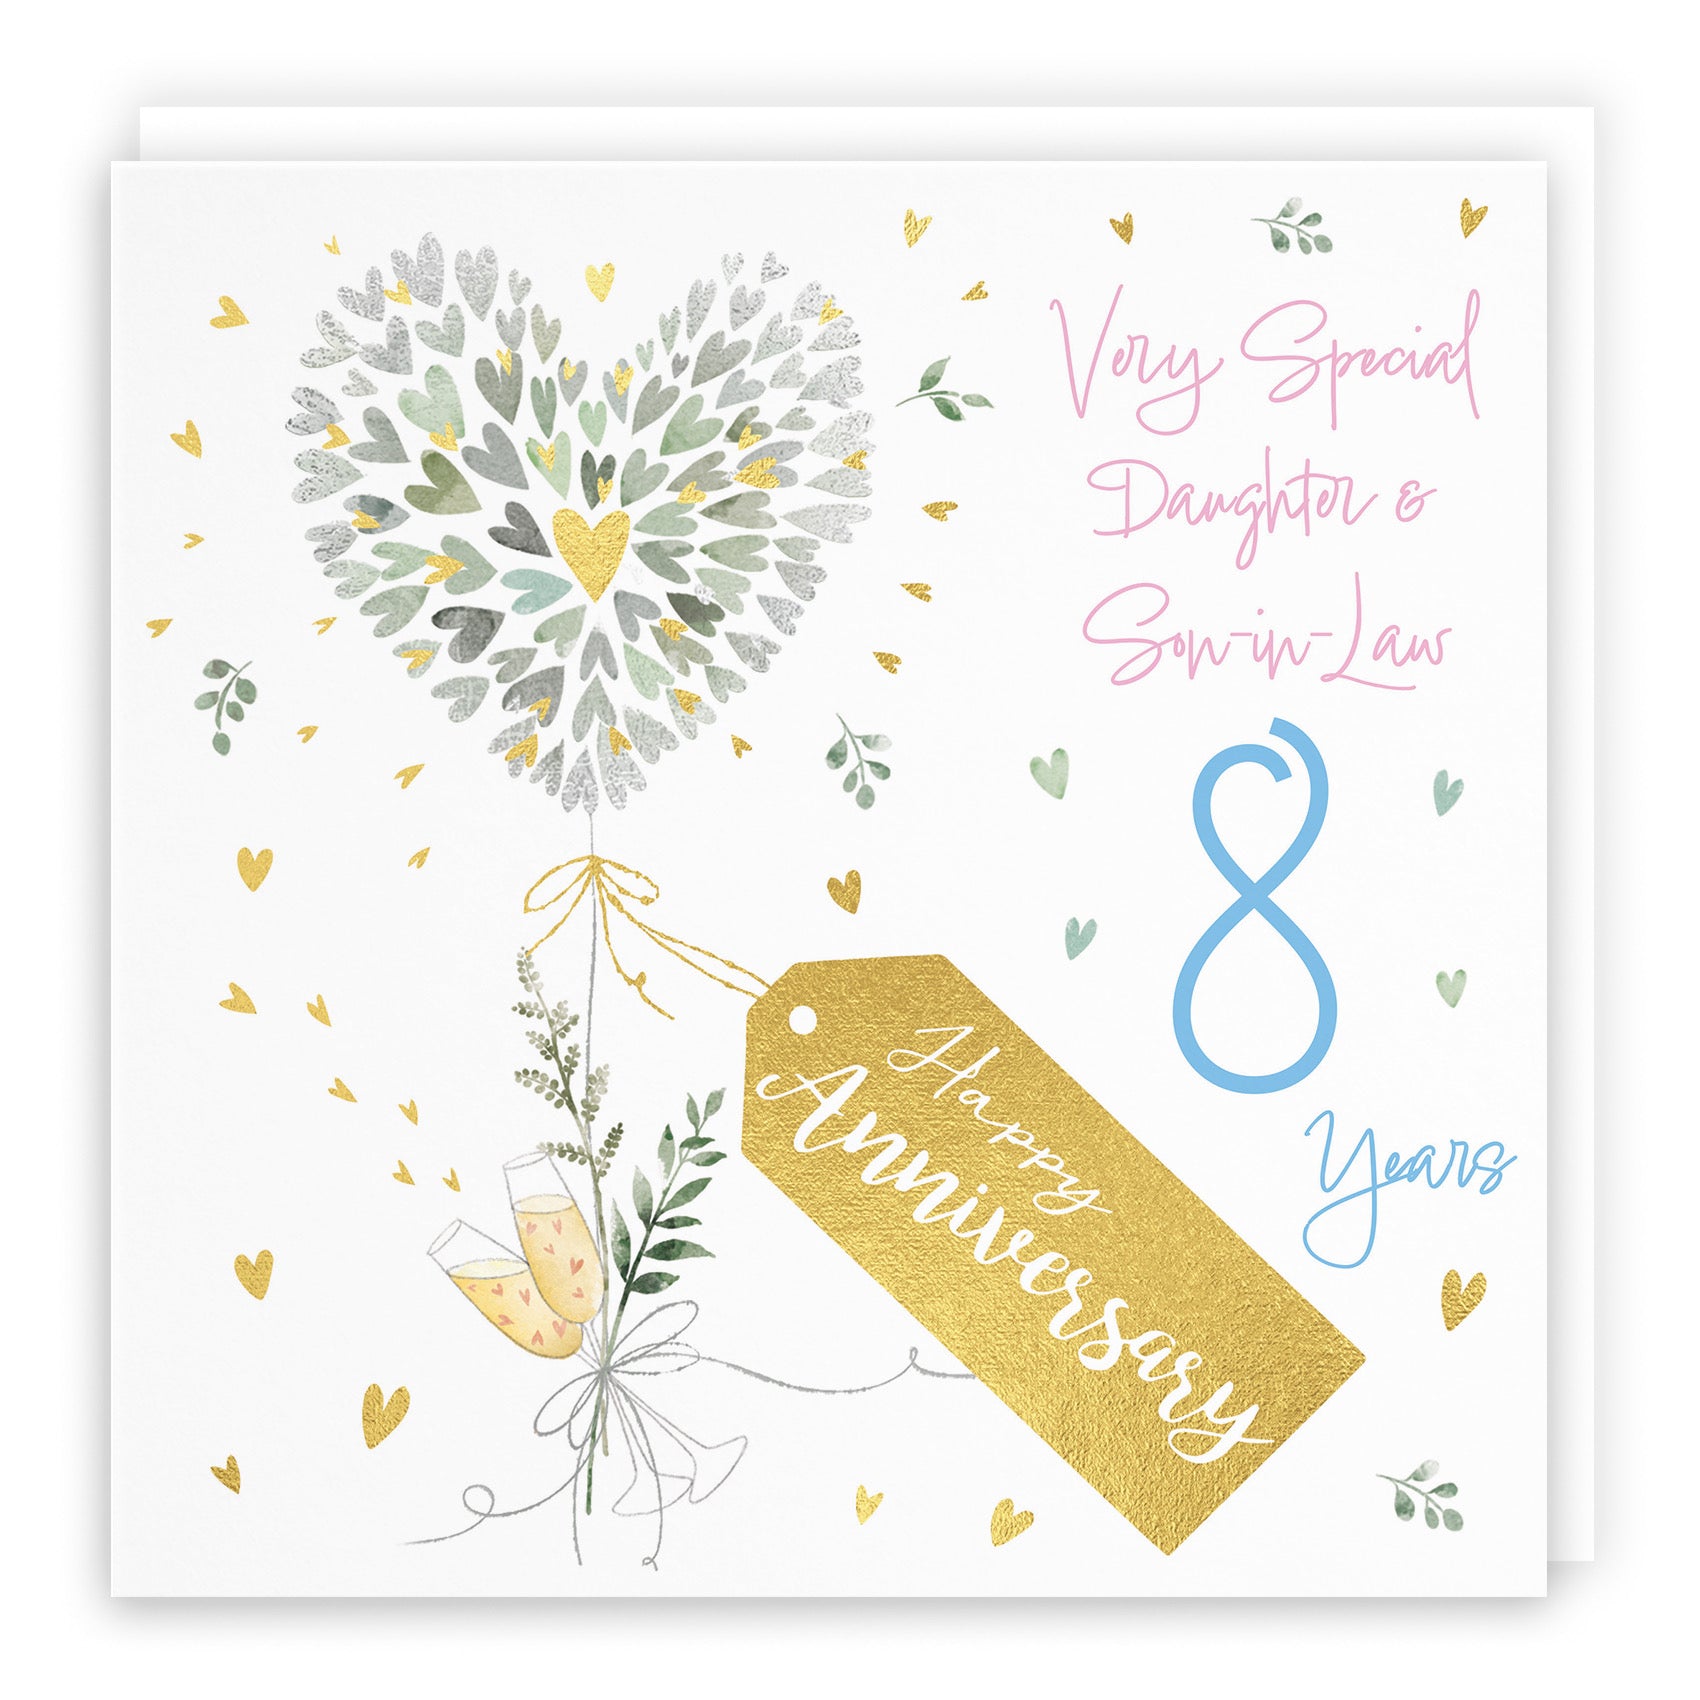 Daughter And Son-in-Law 8th Anniversary Card Contemporary Hearts Milo's Gallery - Default Title (B0CKJ47QF2)